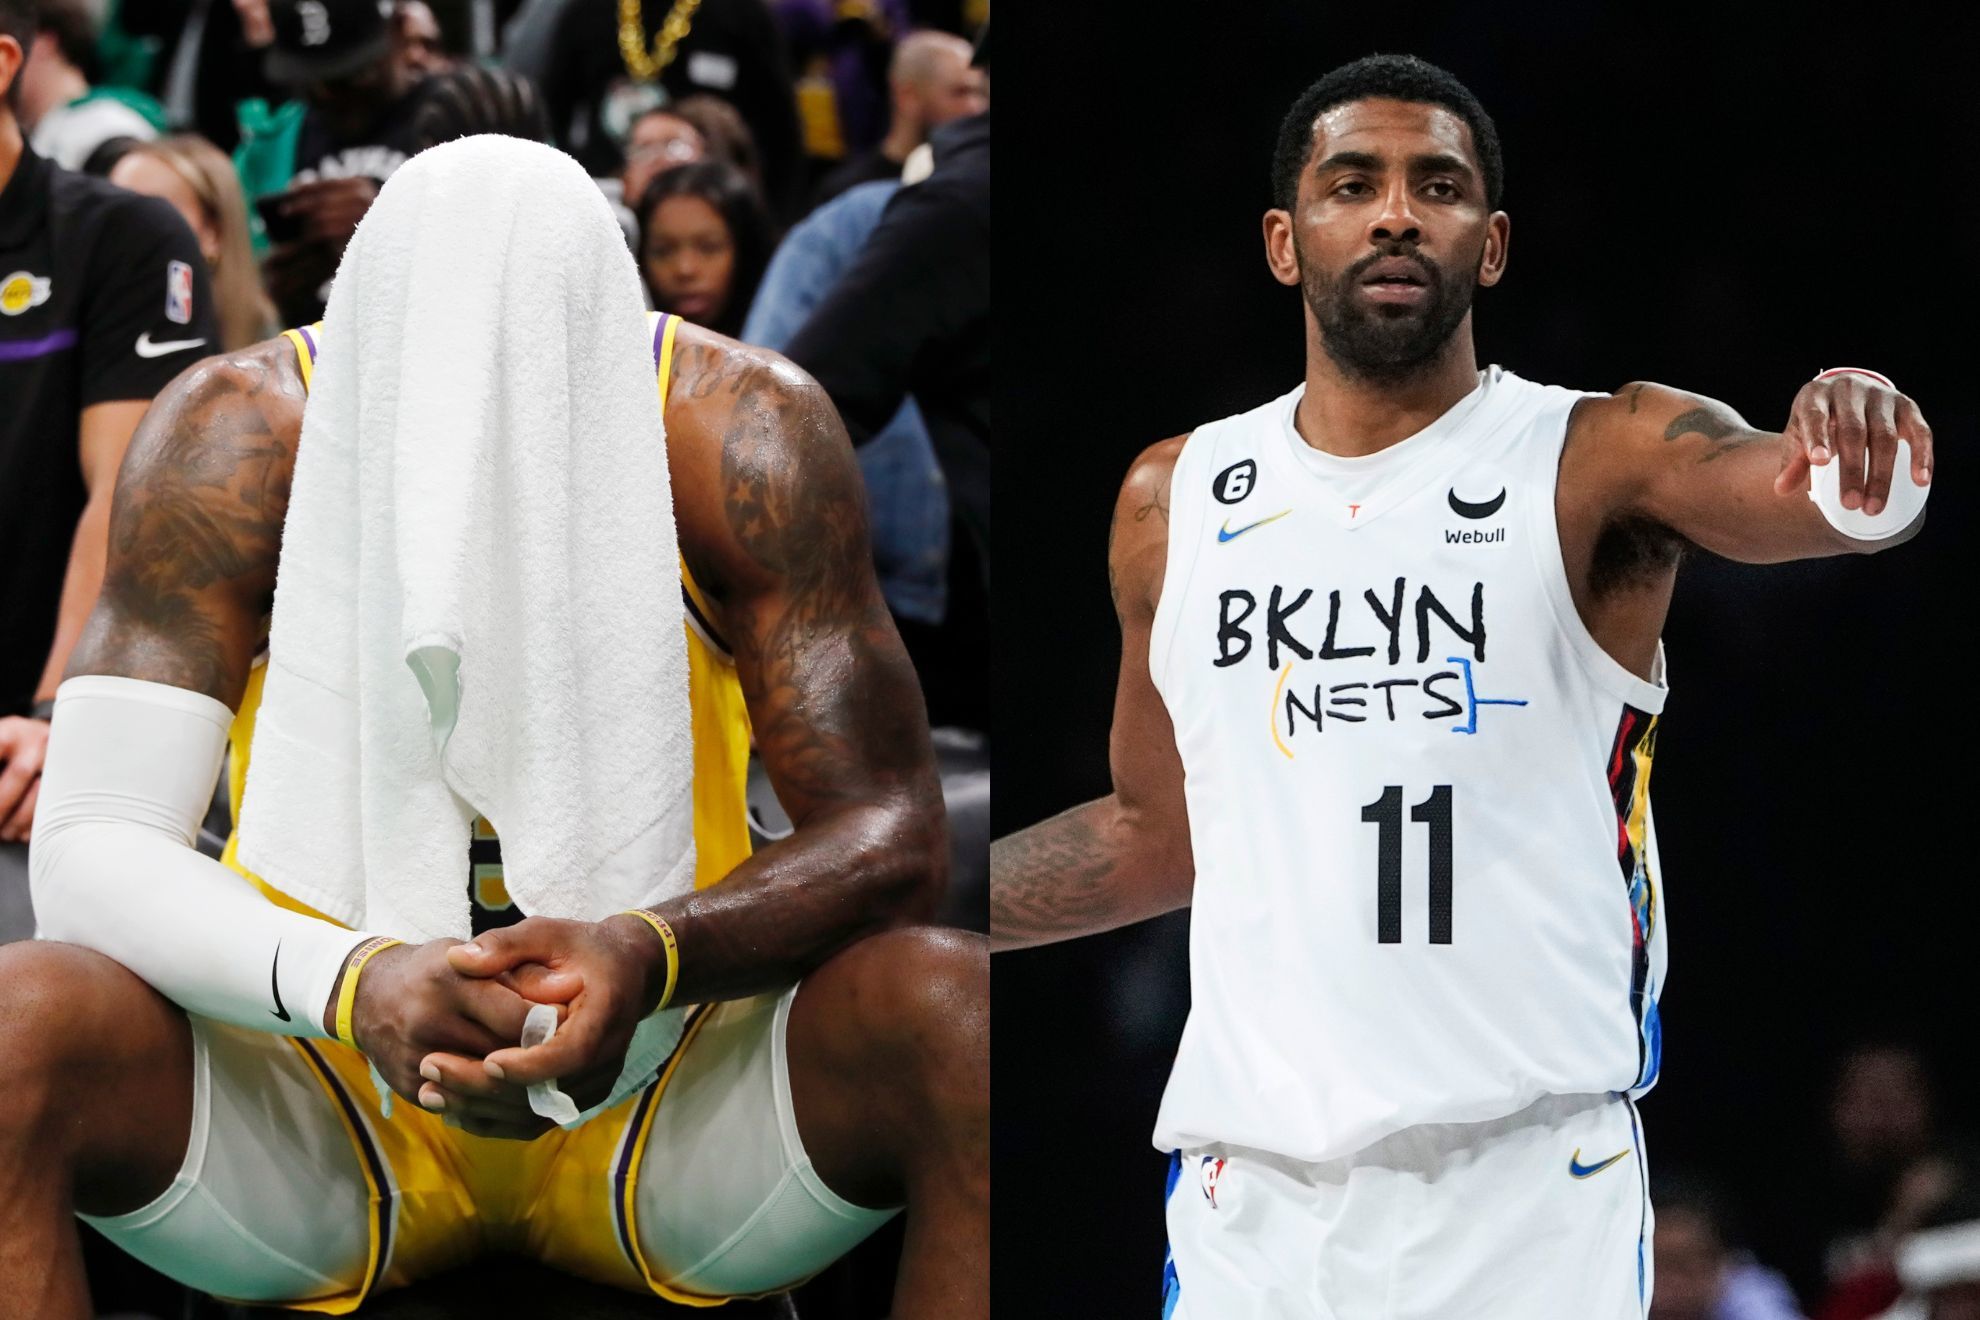 LeBron James, Los Angeles Lakers (left) and Kyrie Irving, Brooklyn Nets (right)